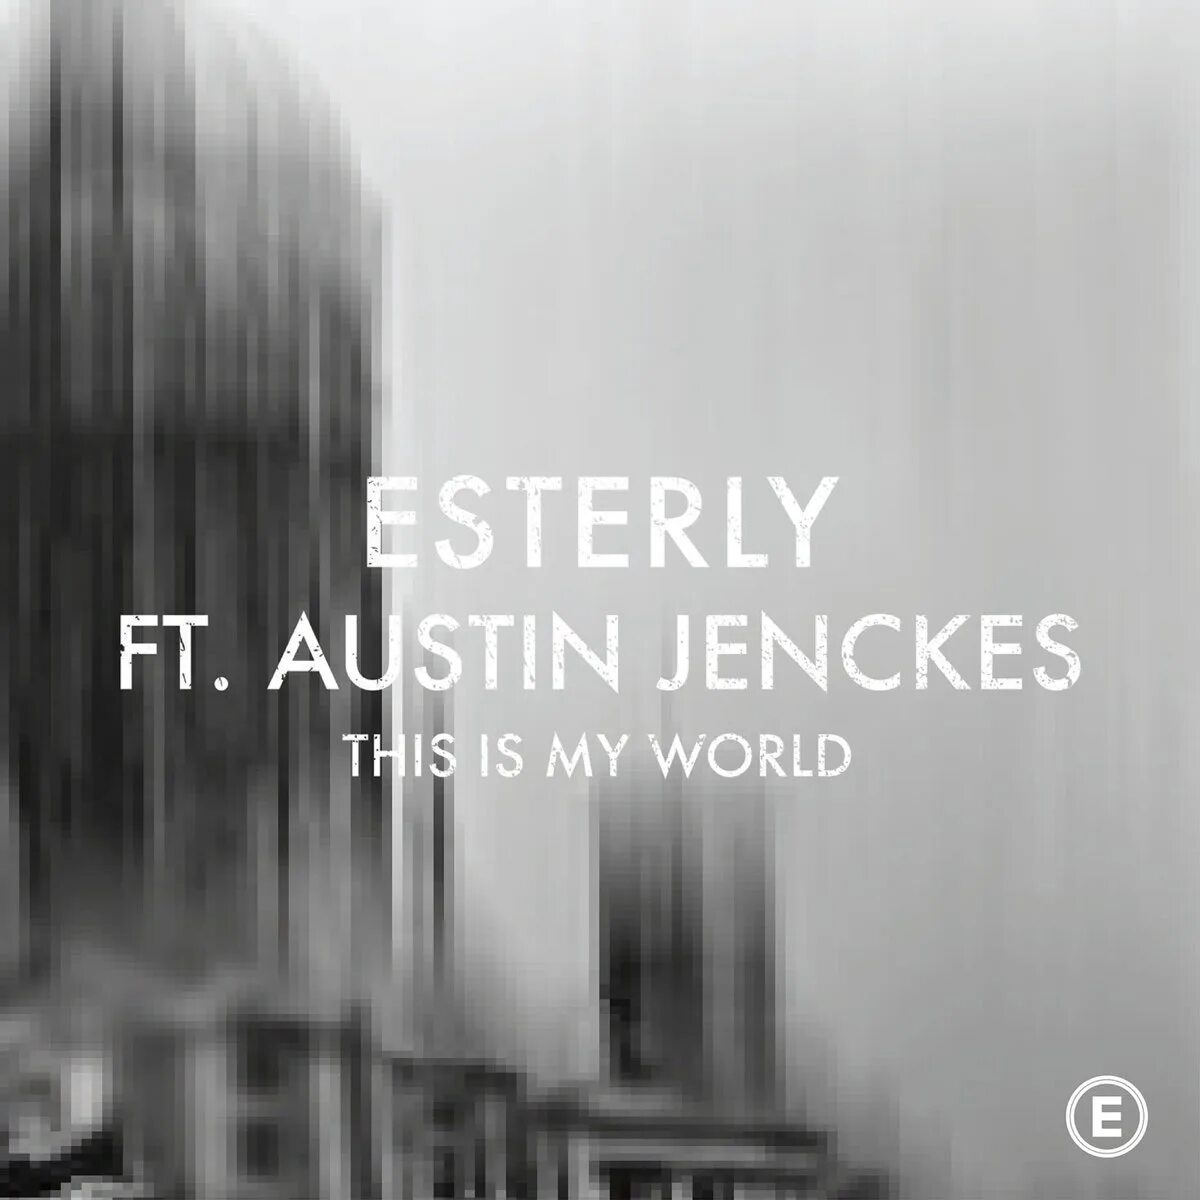 This is my head. Esterly feat. Austin Jenckes — this is my World. Esterly feat. Austin Jenckes. This is my World Esterly ft. Austin Jenckes Official. My World - Official Music.